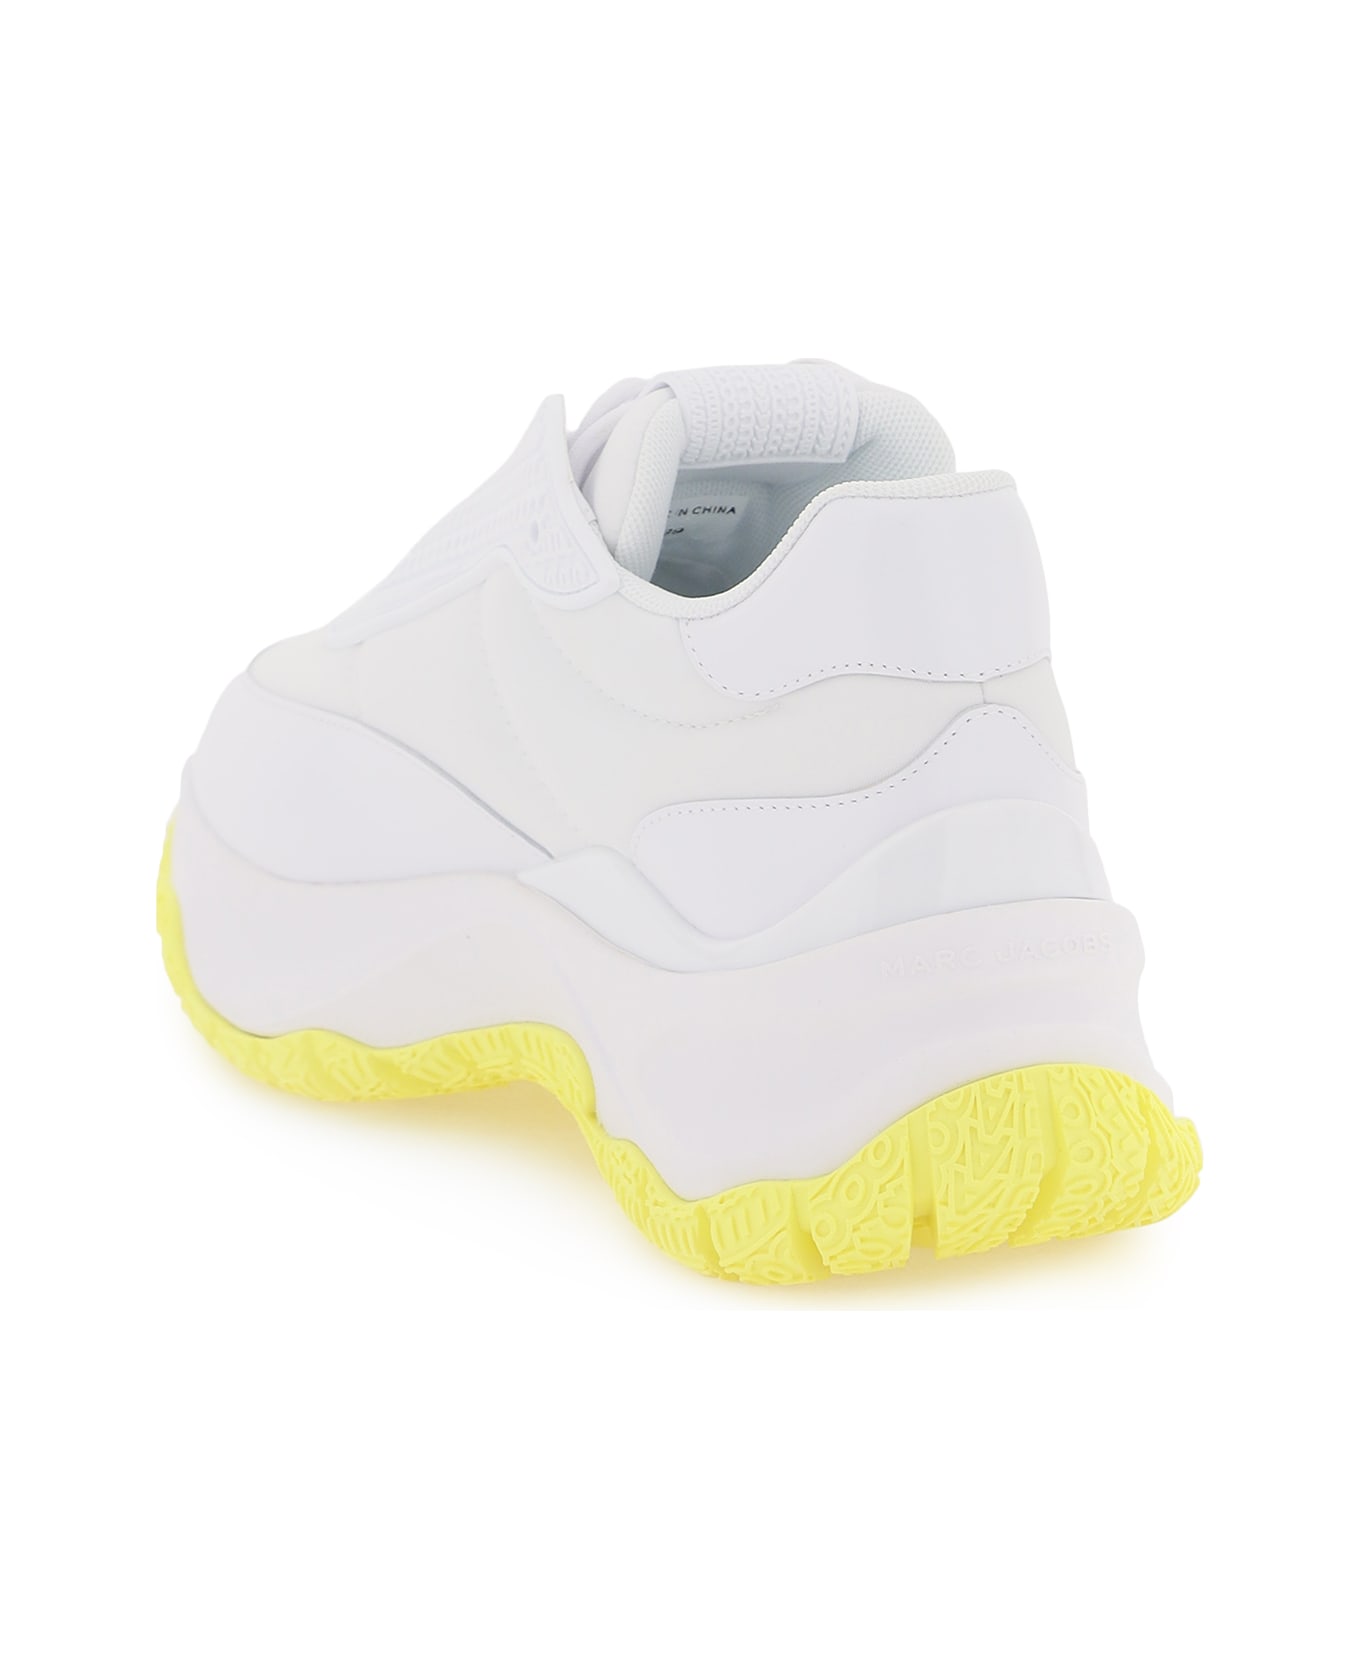 Marc Jacobs The Lazy Runner Sneakers - WHITE YELLOW (White) ウェッジシューズ